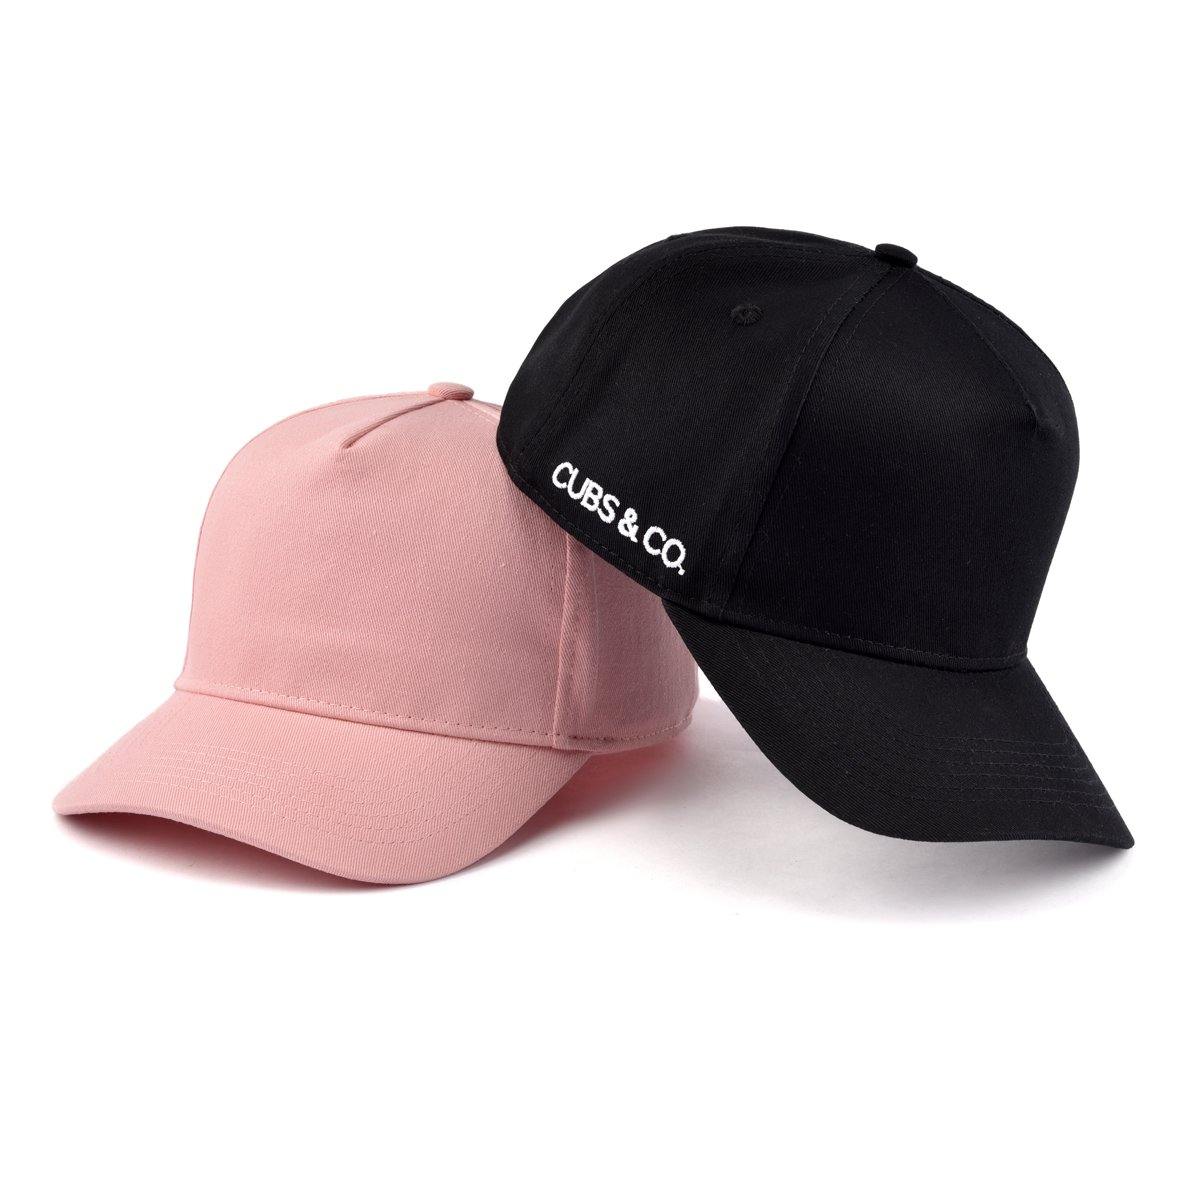 Matching pink and black baseball cap for babies, toddlers, kids and adults. Cubs & Co. Australia